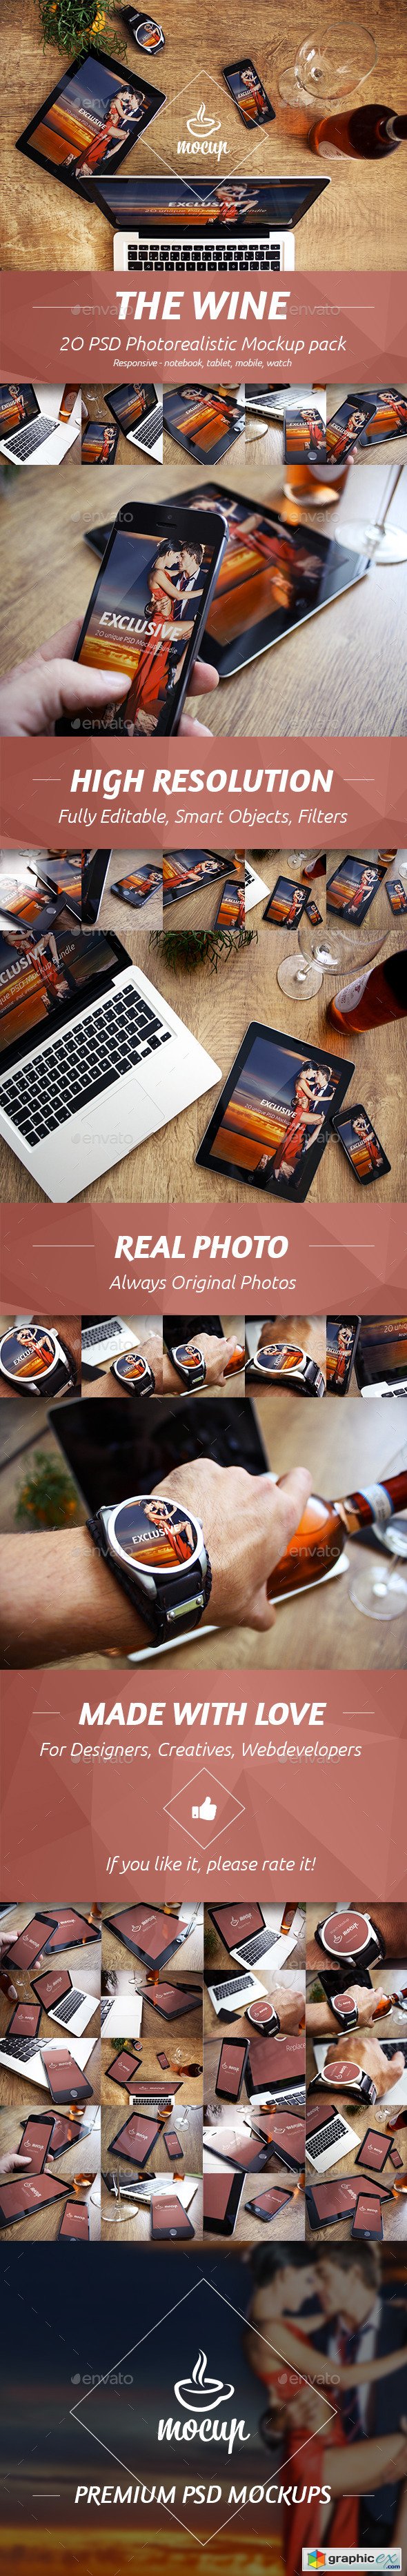 The Wine - 20 PSD Photorealistic Mockup Pack